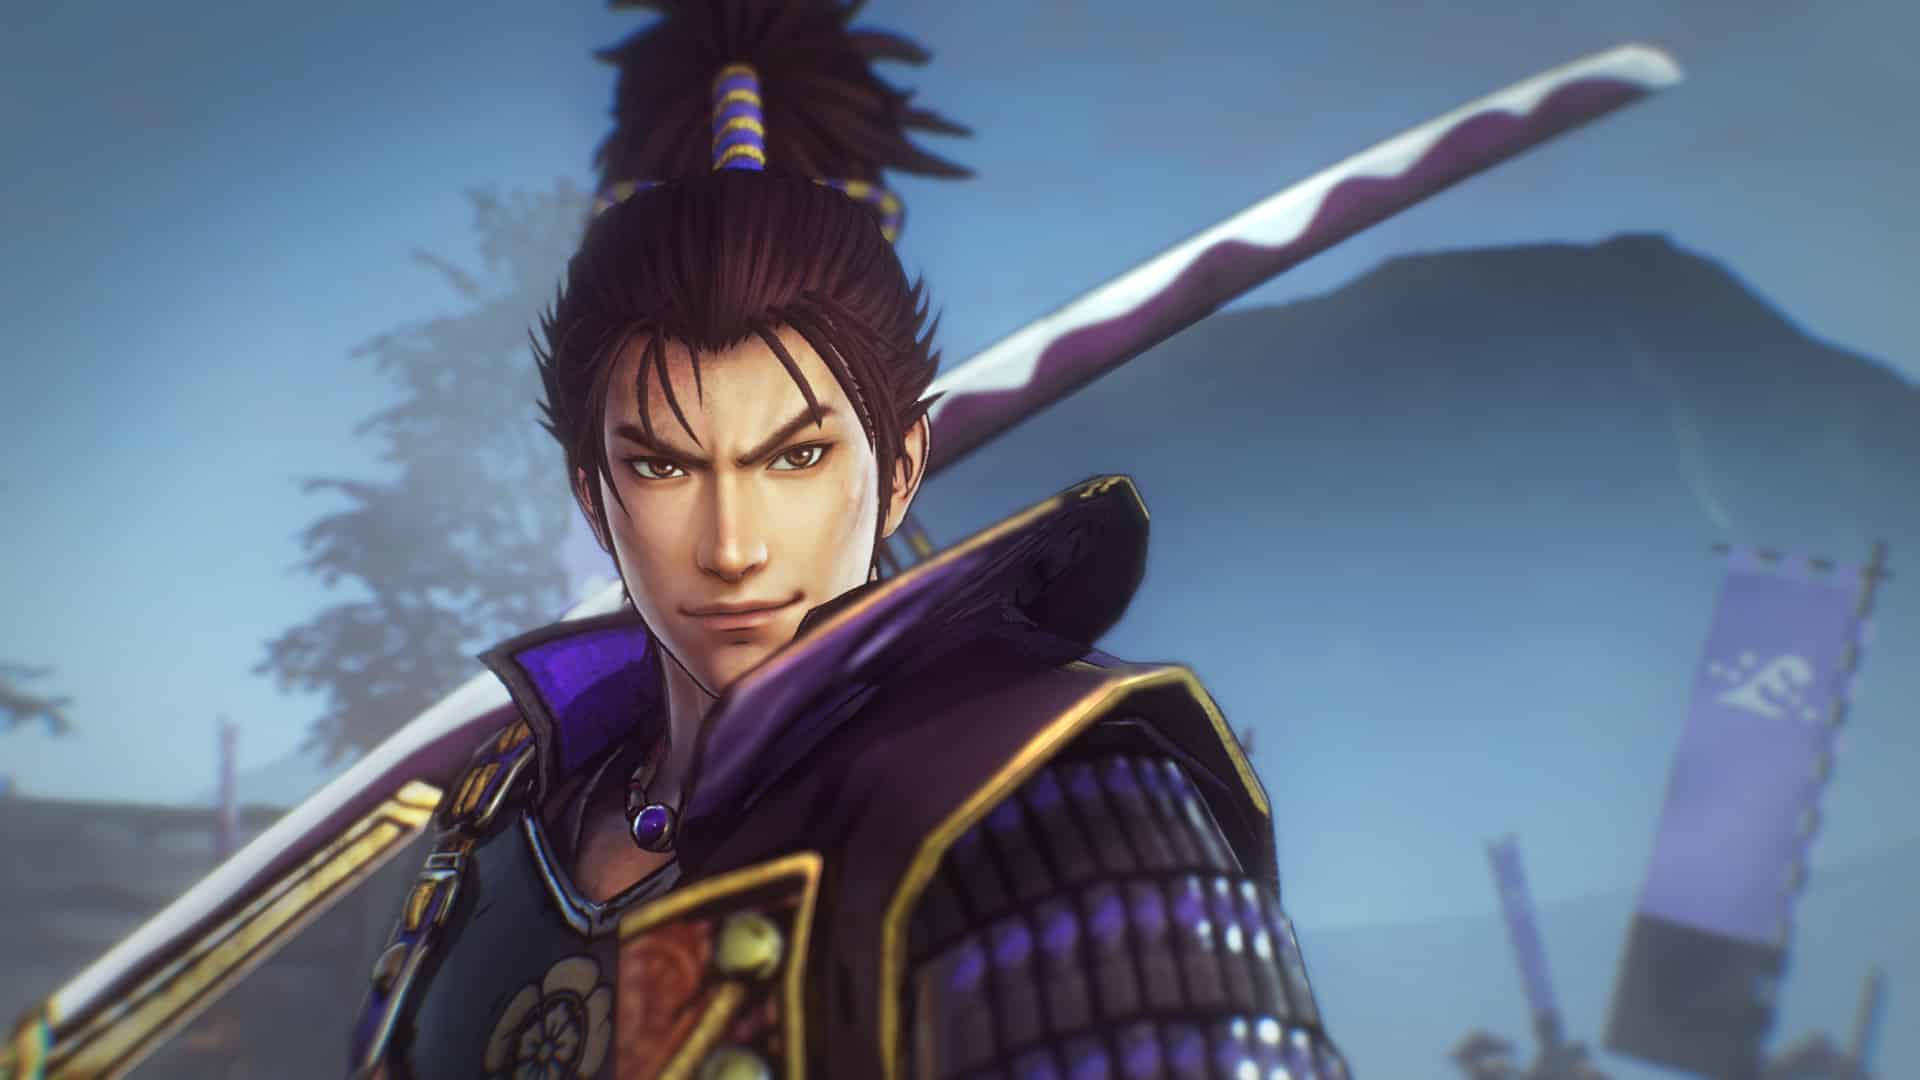 One of the playable characters from Samurai Warriors 5